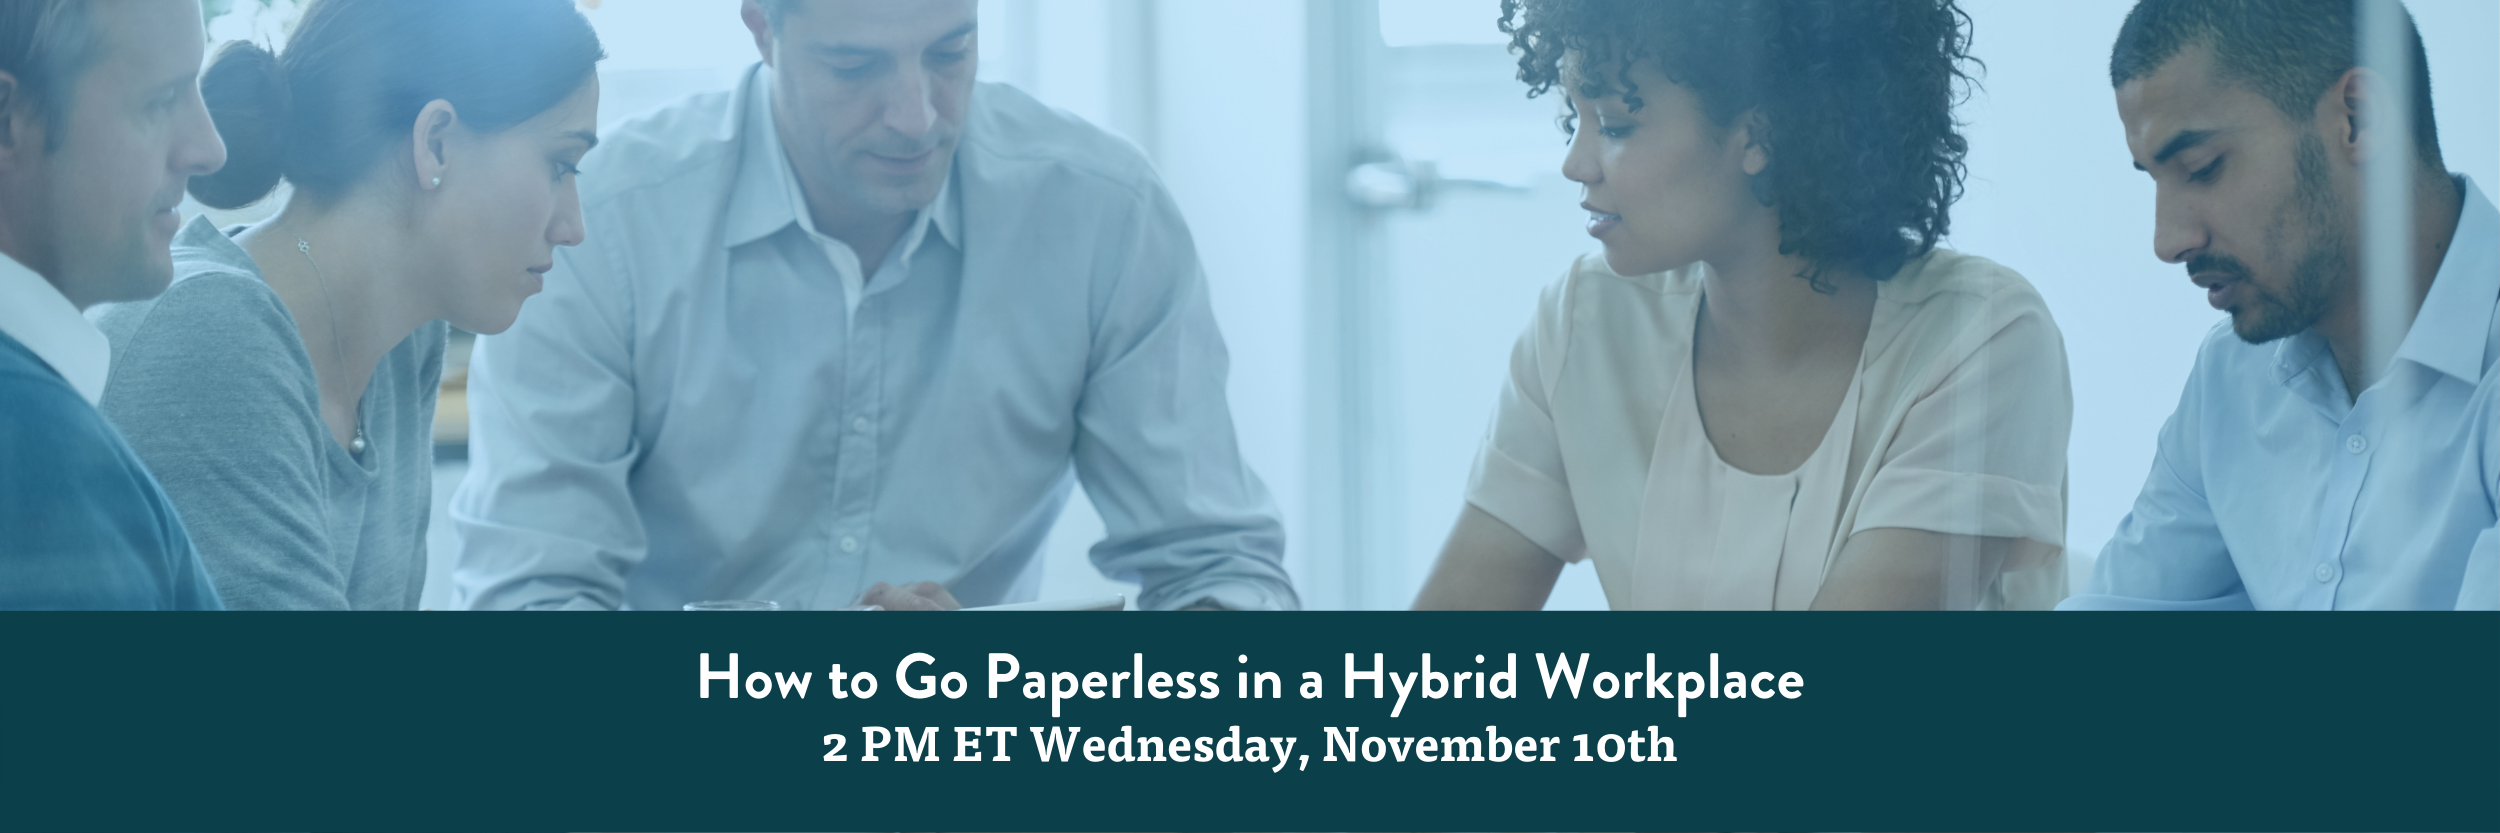 DocLink How to Go Paperless in a Hybrid Workplace